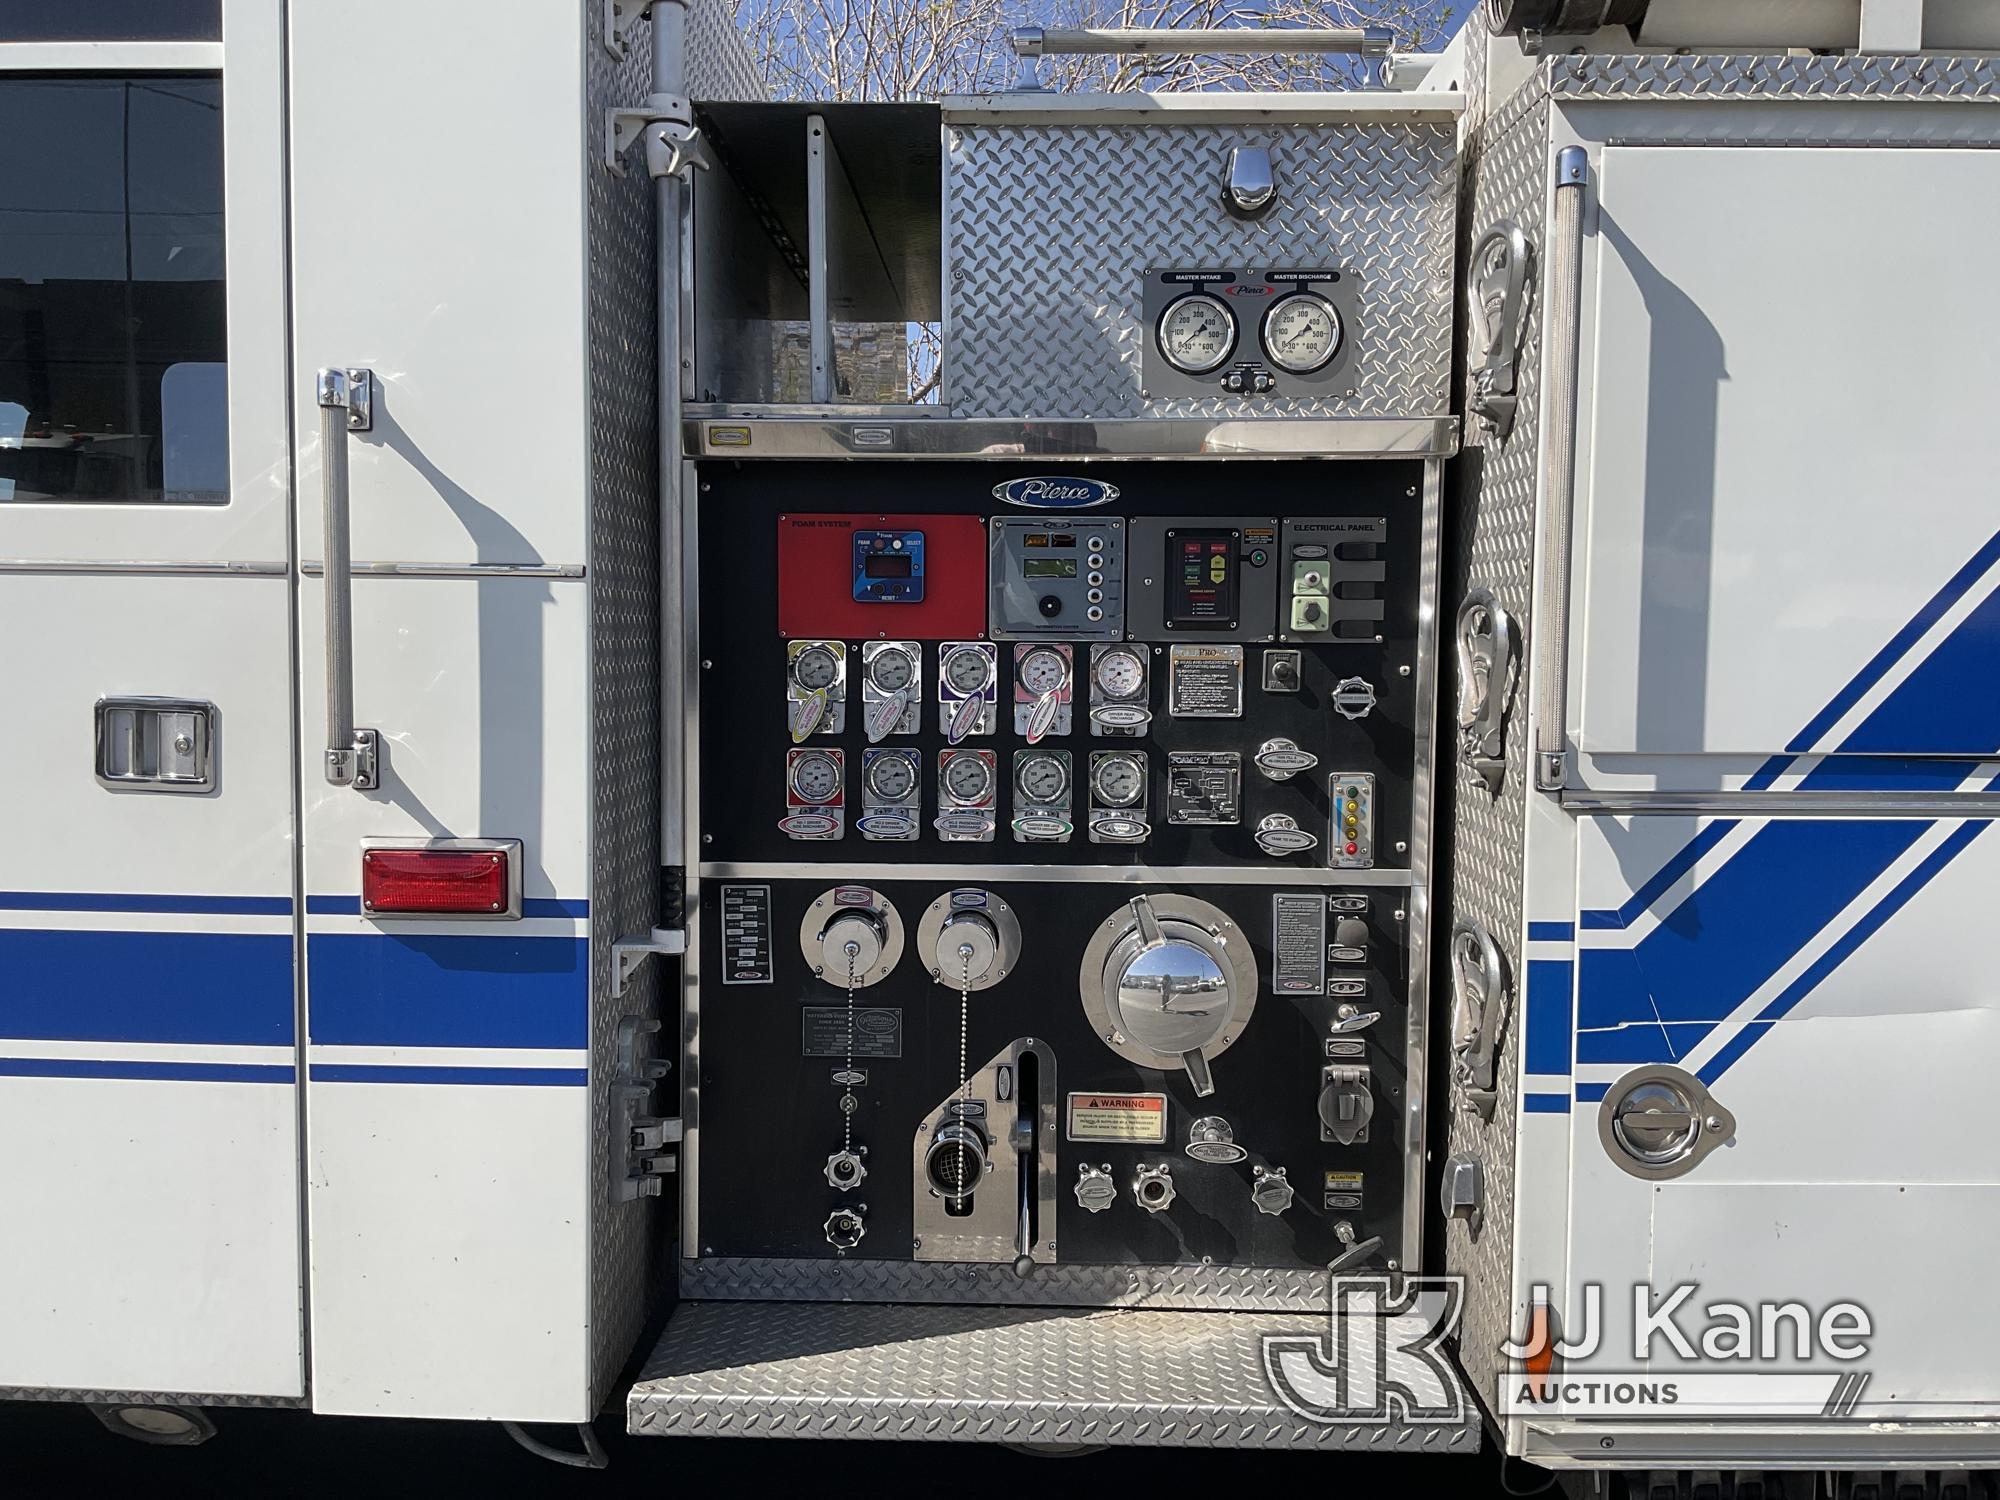 (Jurupa Valley, CA) 2000 Pierce Model Tilt Cab Fire Truck Runs & Moves, Does Not Have The Remote To